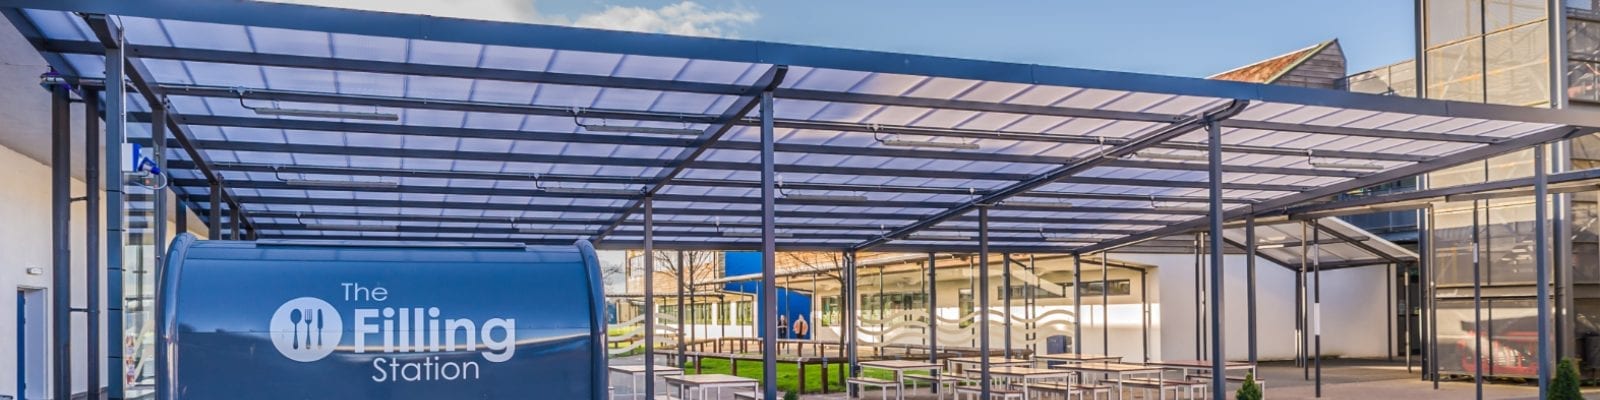 Straight Roof Canopy at Whitecross High School